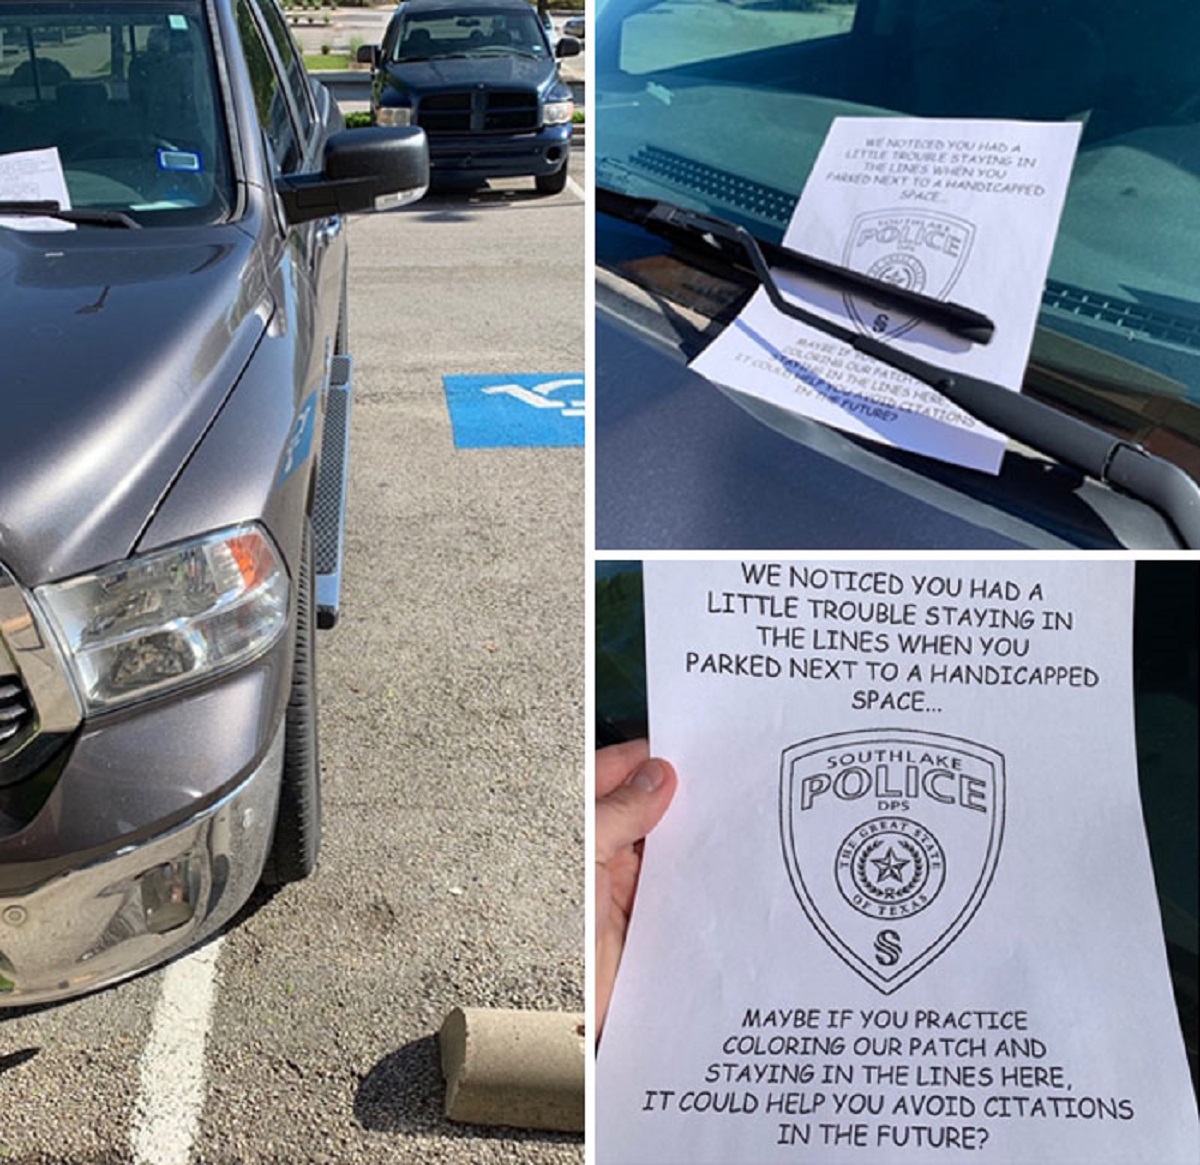 parking inside the lines - We Noticed You Had A Little Trouble Staying In The Lines When You Parked Next To A Handicapped Space... Southlake Police $ Maybe If You Practice Coloring Our Patch And Staying In The Lines Here, It Could Help You Avoid Citations